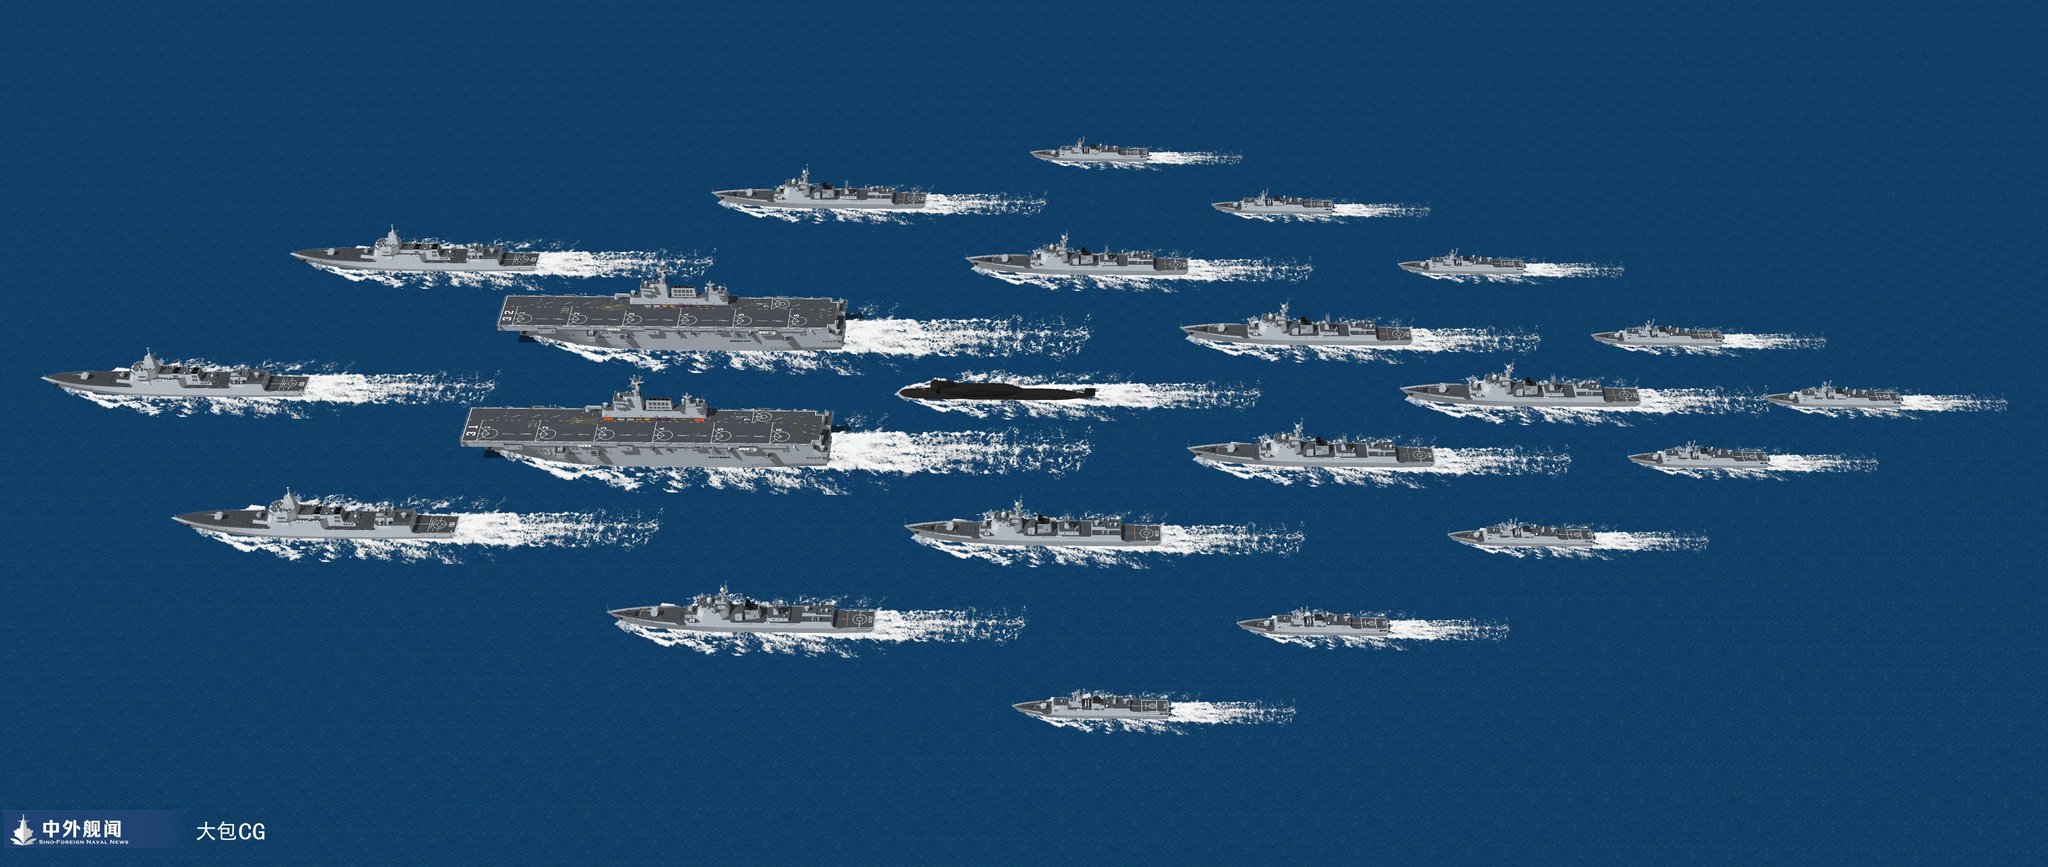 General summary of warships in the Chinese Navy in 2021.